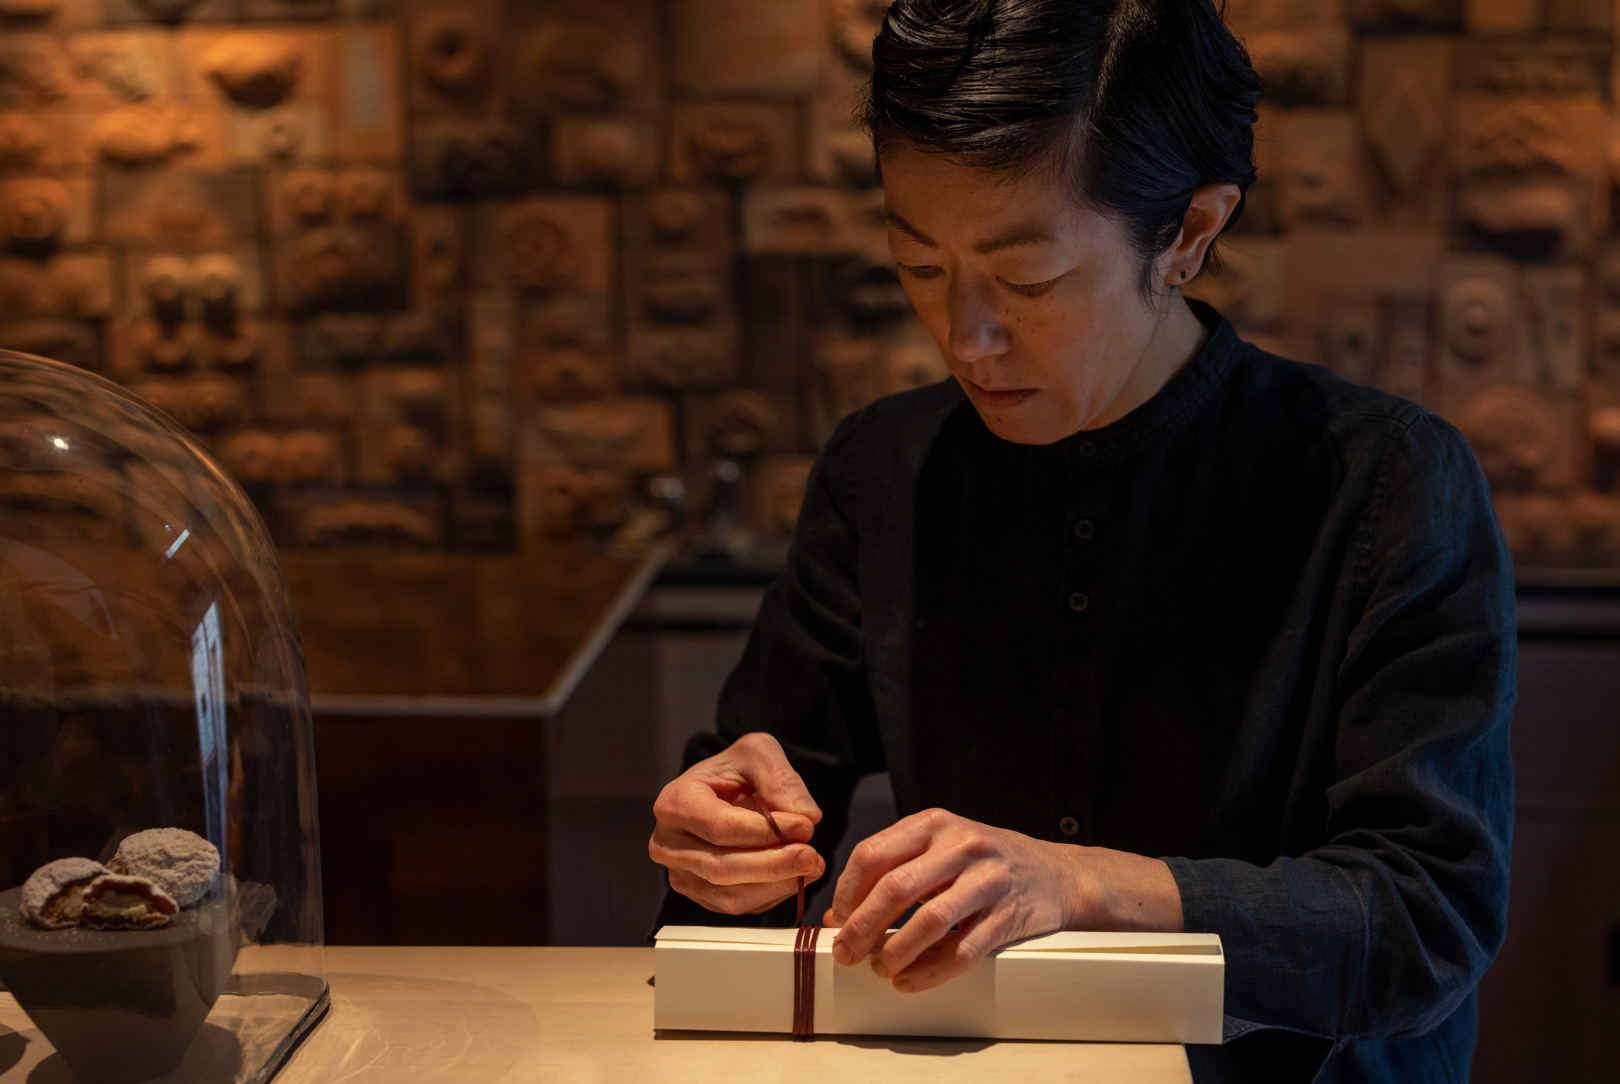 a shop assistant wrap a box of wagashi, traditional Japanese pastries, in white paper